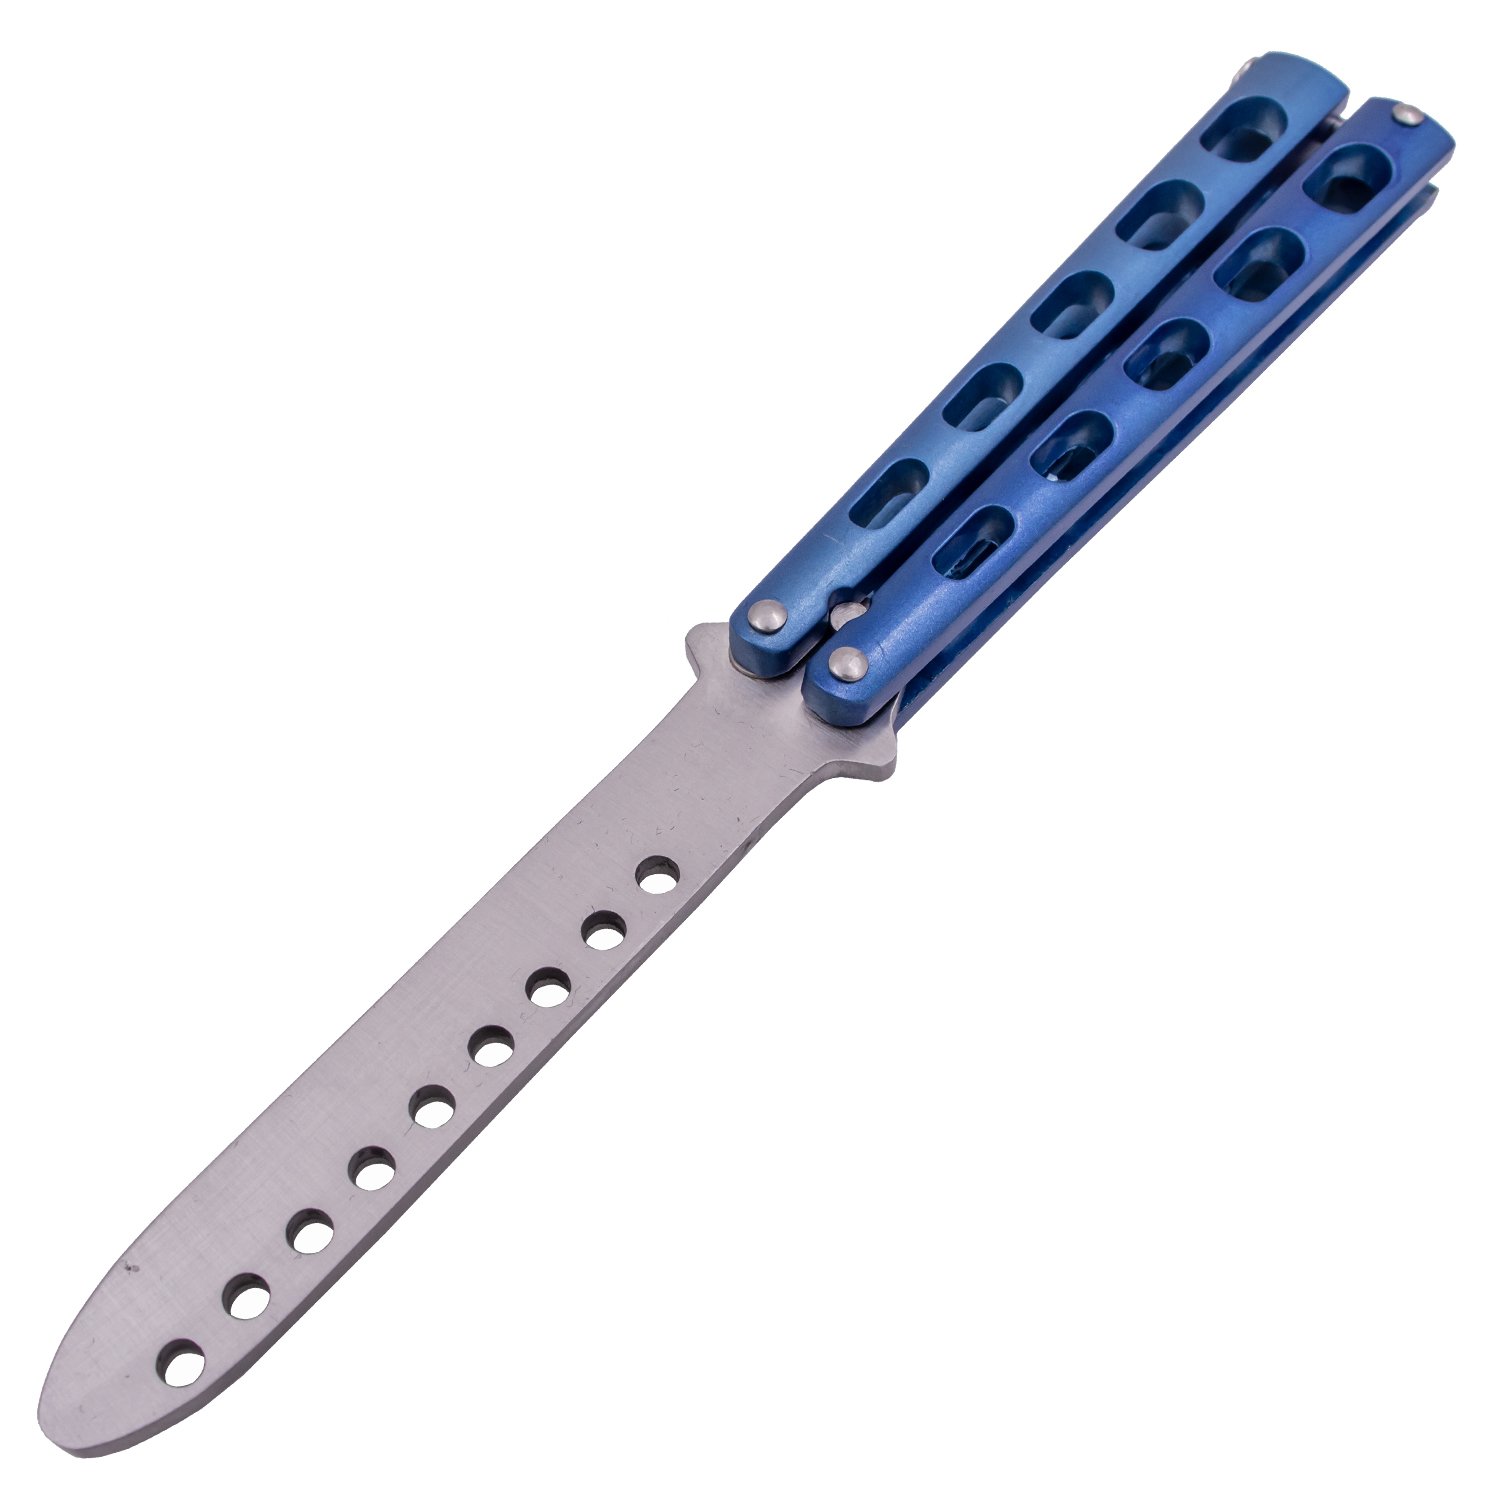 Tiger USA Butterfly Training Knife 440 Stainless 8.85 Inch   Blue Picture 1